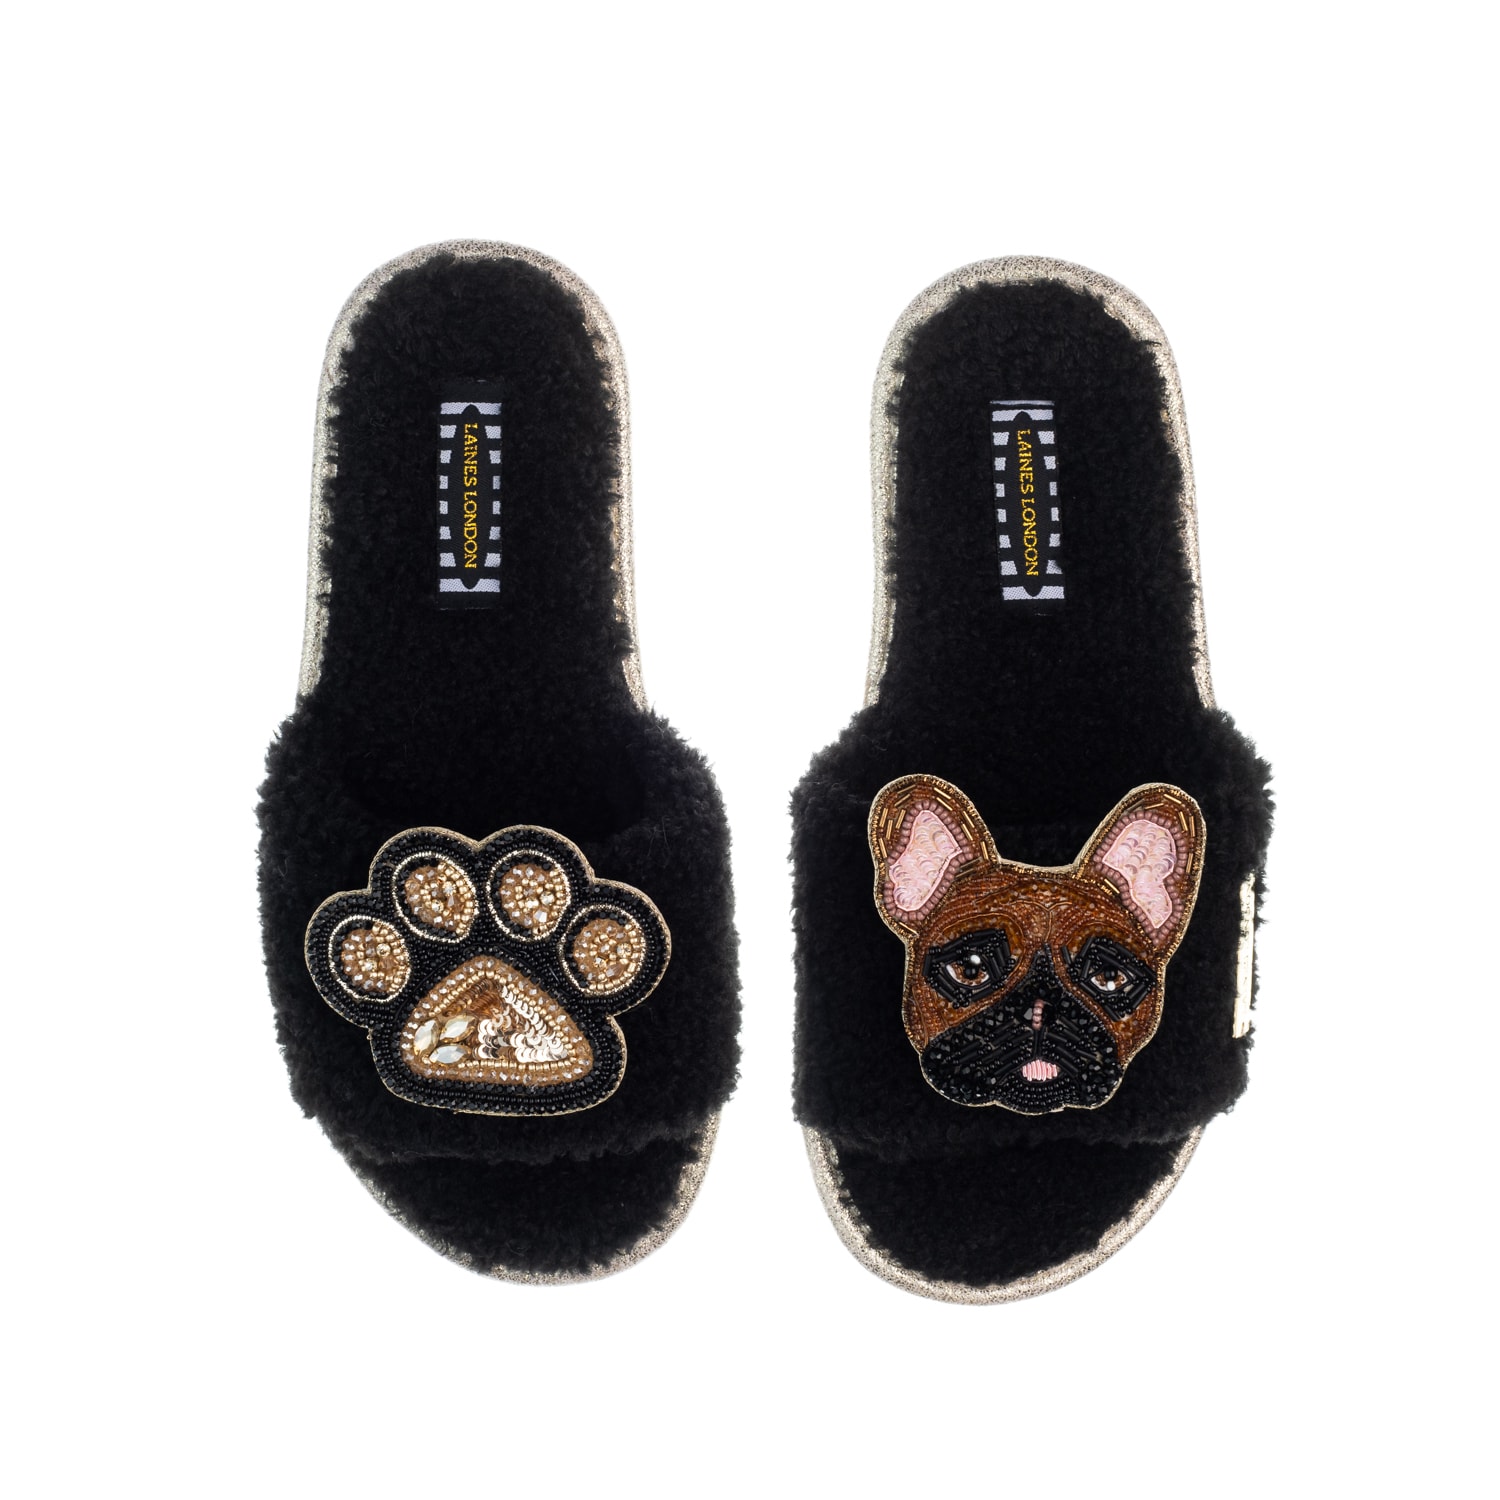 Women’s Teddy Toweling Slippers With Cookie The Frenchie & Paw Brooches - Black Medium Laines London